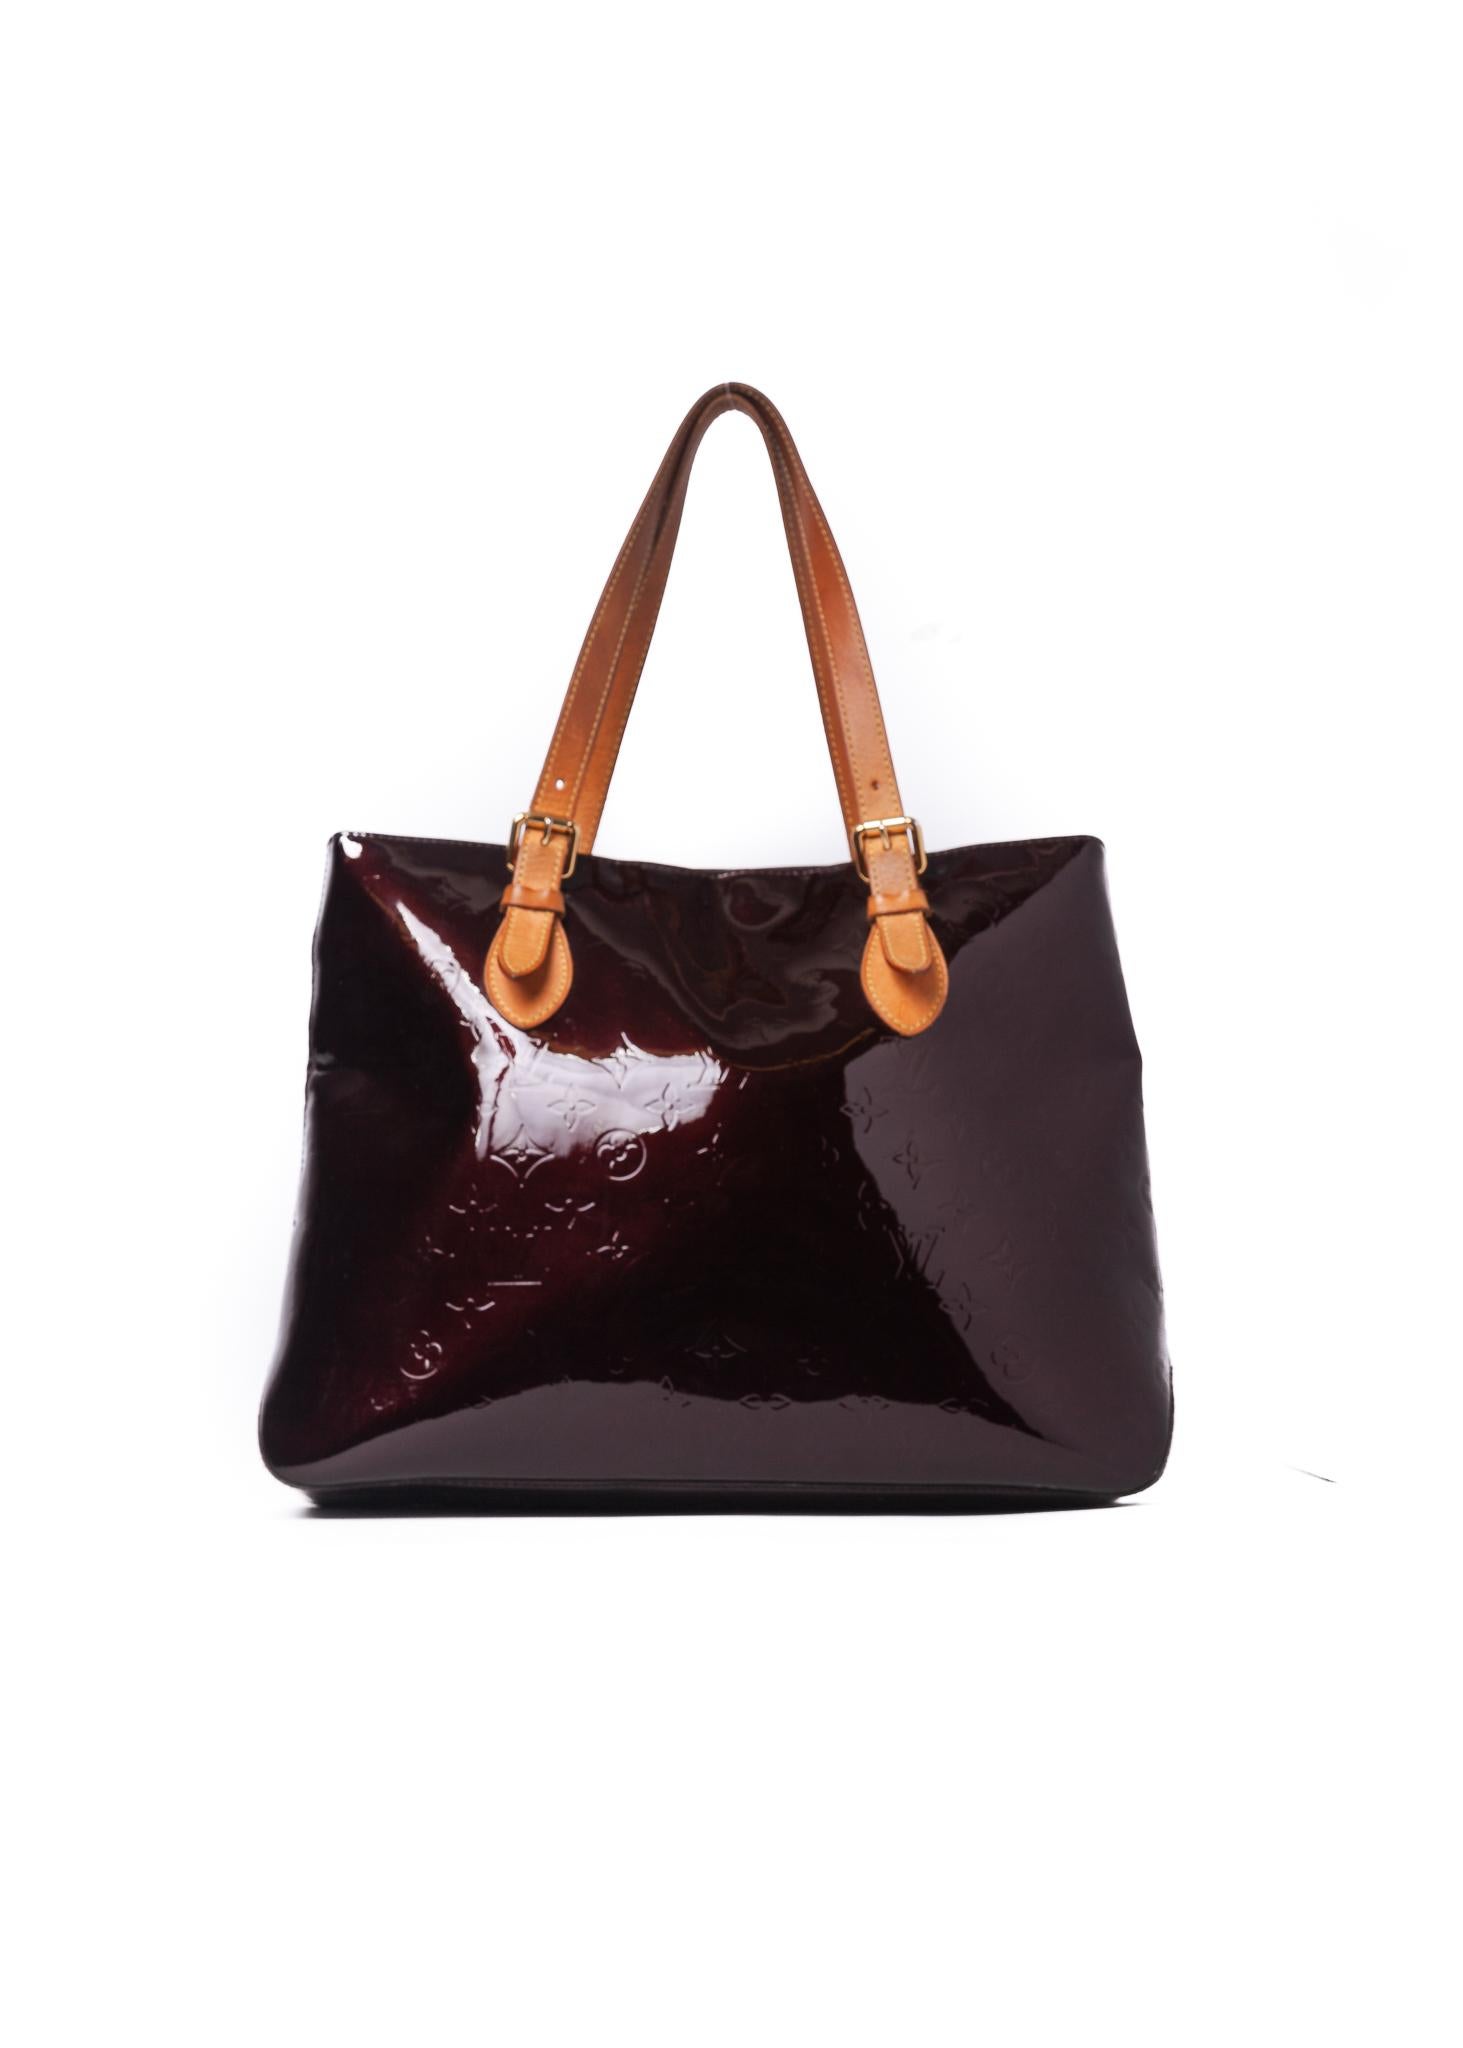 This style of patent leather monogram embossed bags are named Vernis as the French word for varnish is “vernis”.  Vernis was introduced by Marc Jacobs in 1998. 
This bag is made of calfskin leather embossed with monogram print and coated with a